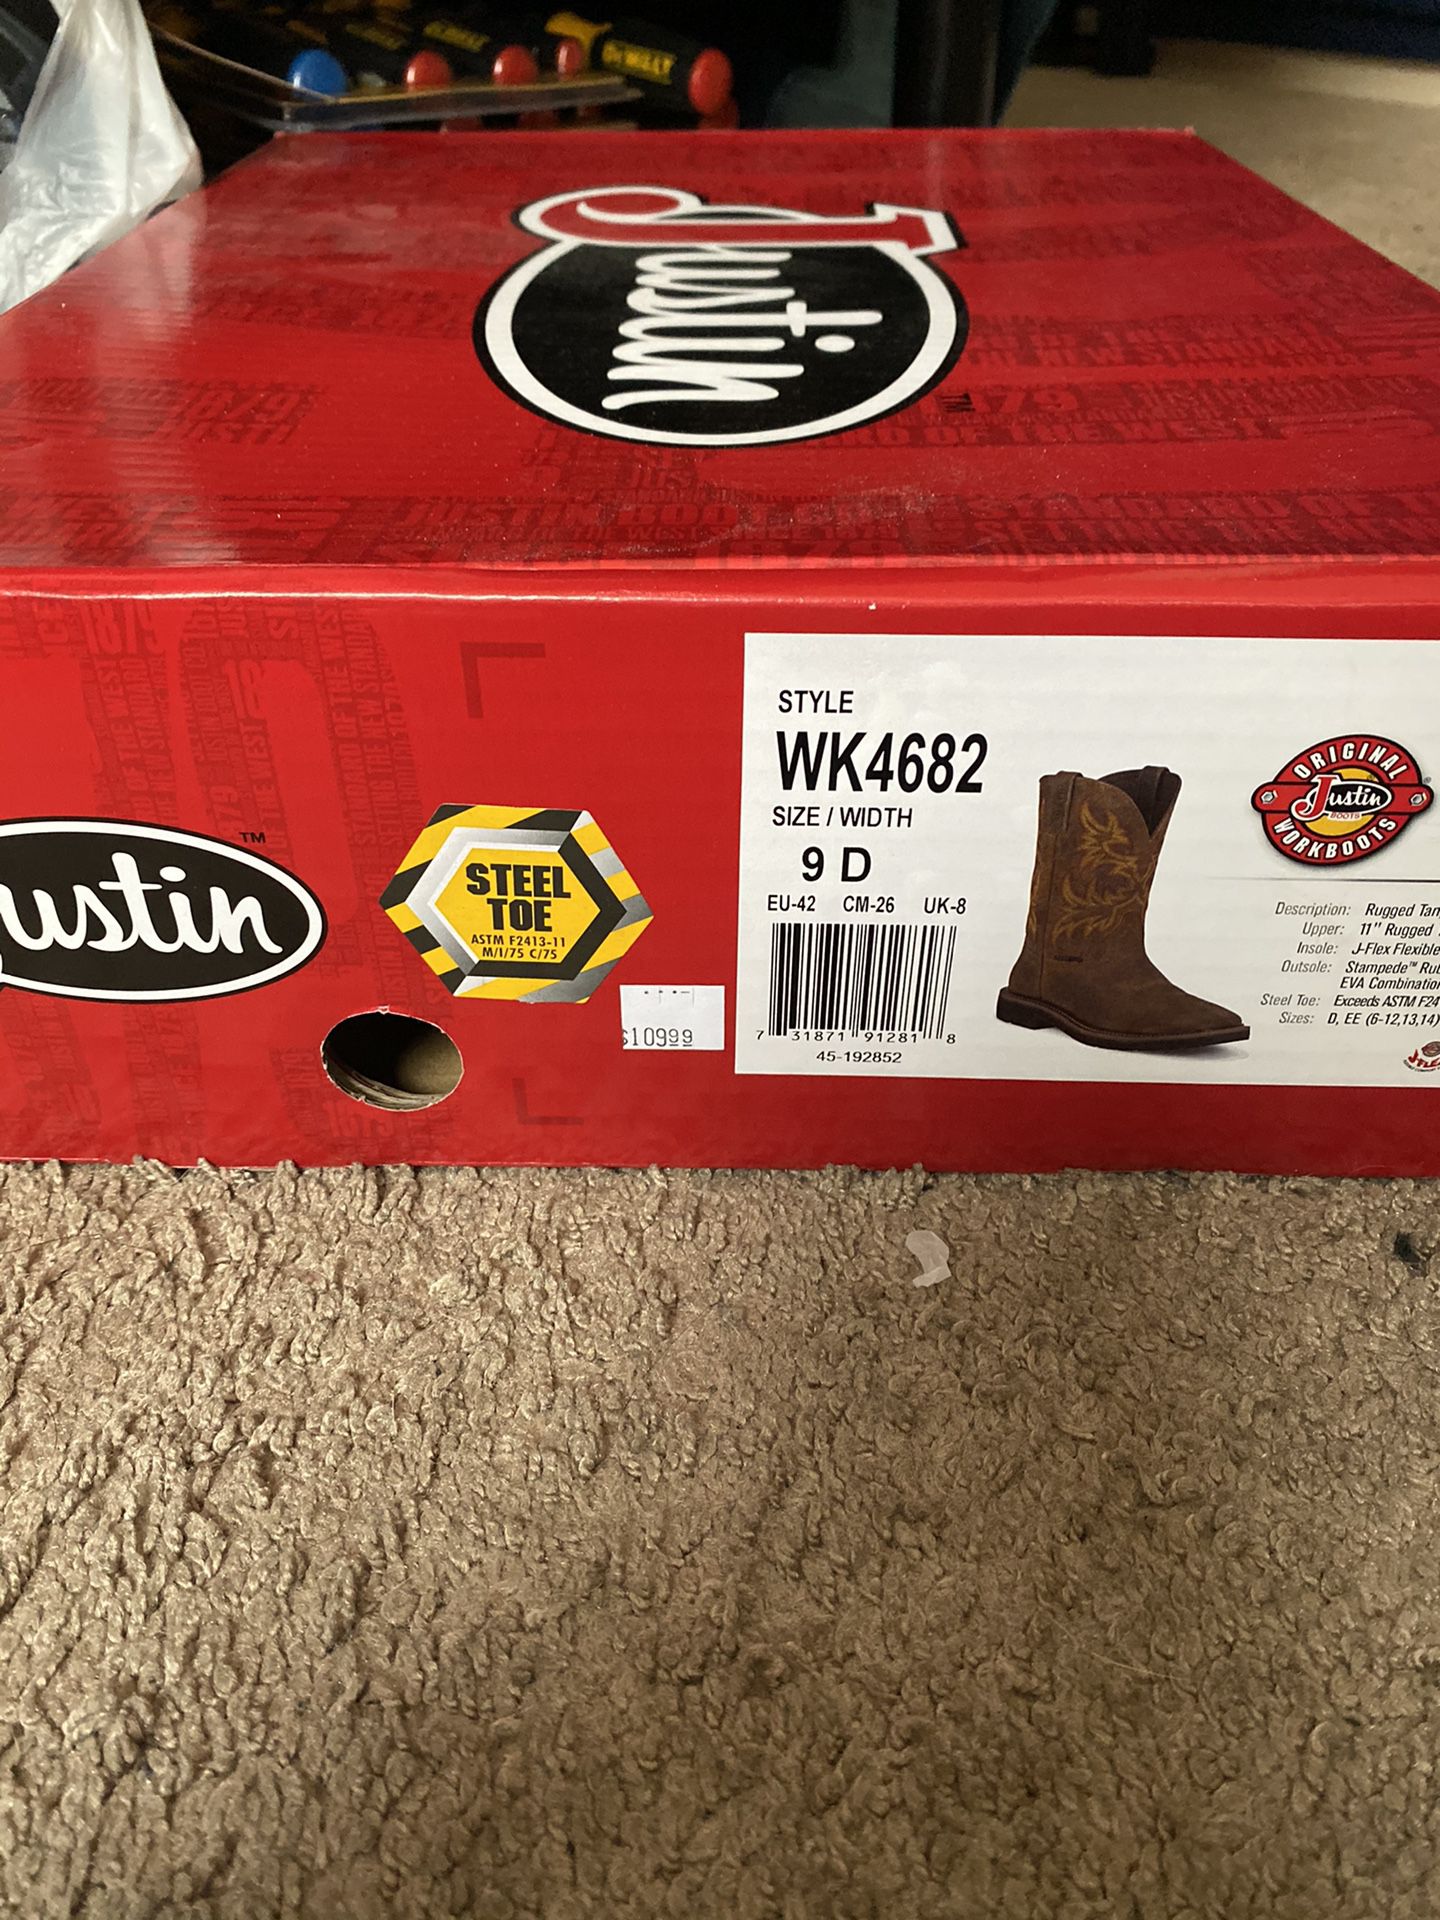 New Justin steel toe work boots size 9D